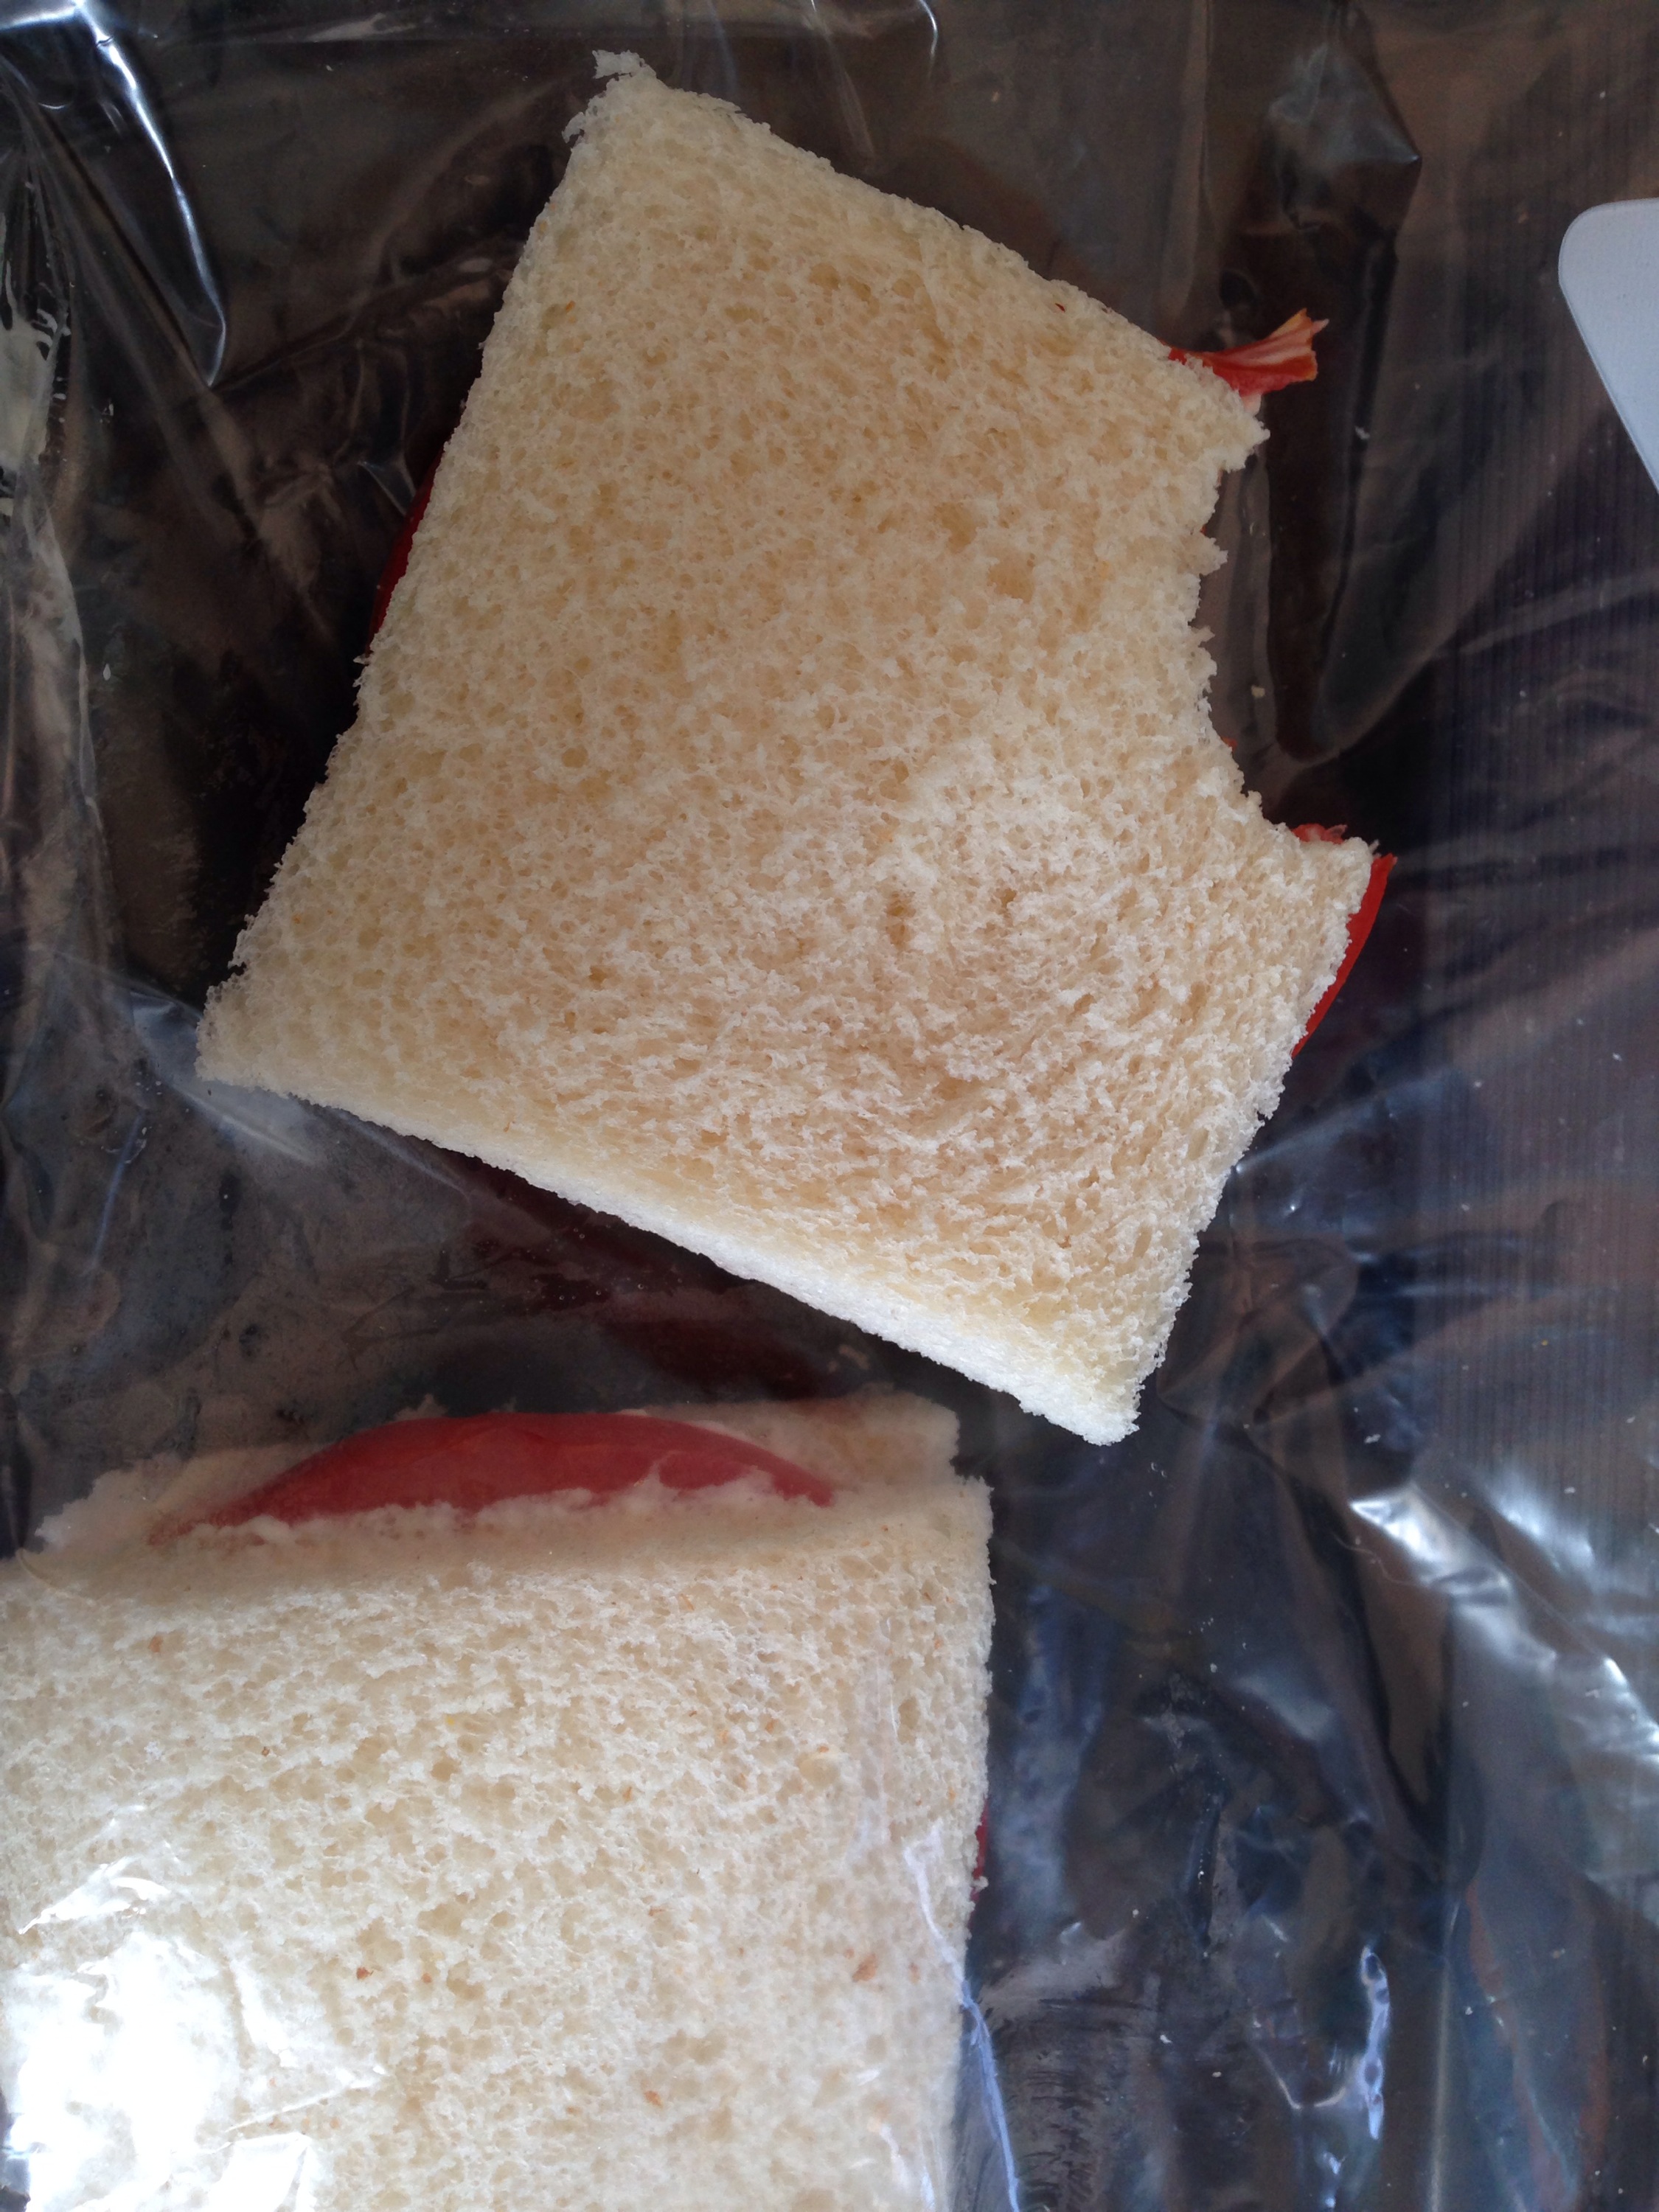 tomato sandwiches on white bread with the crust cut off